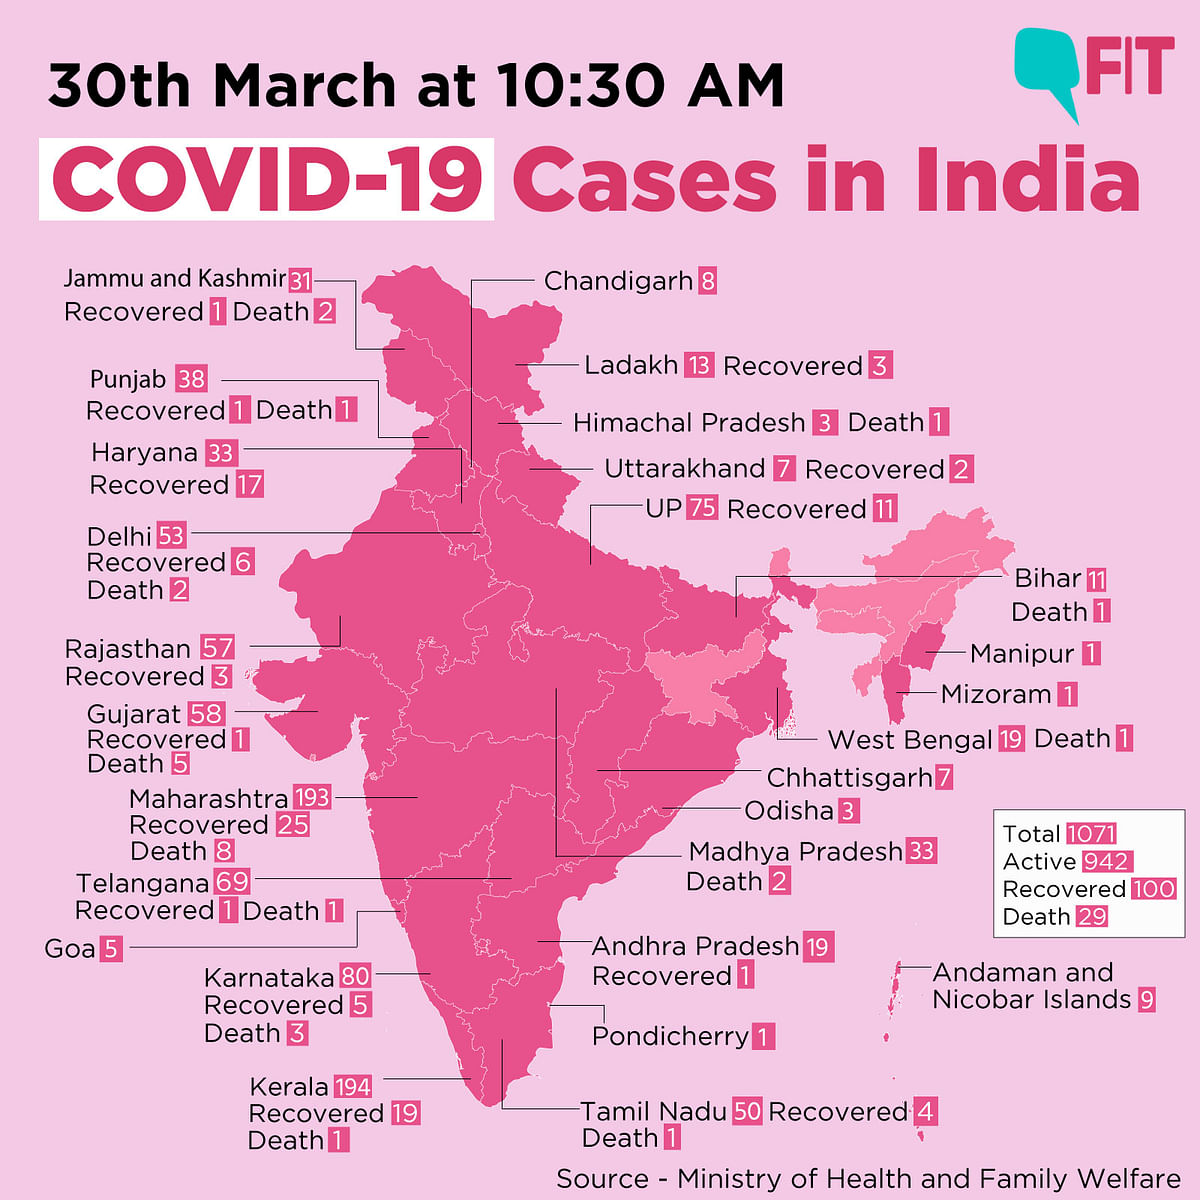 COVID-19 India Updates: Total Cases Rise to 1071;  Deaths at 29